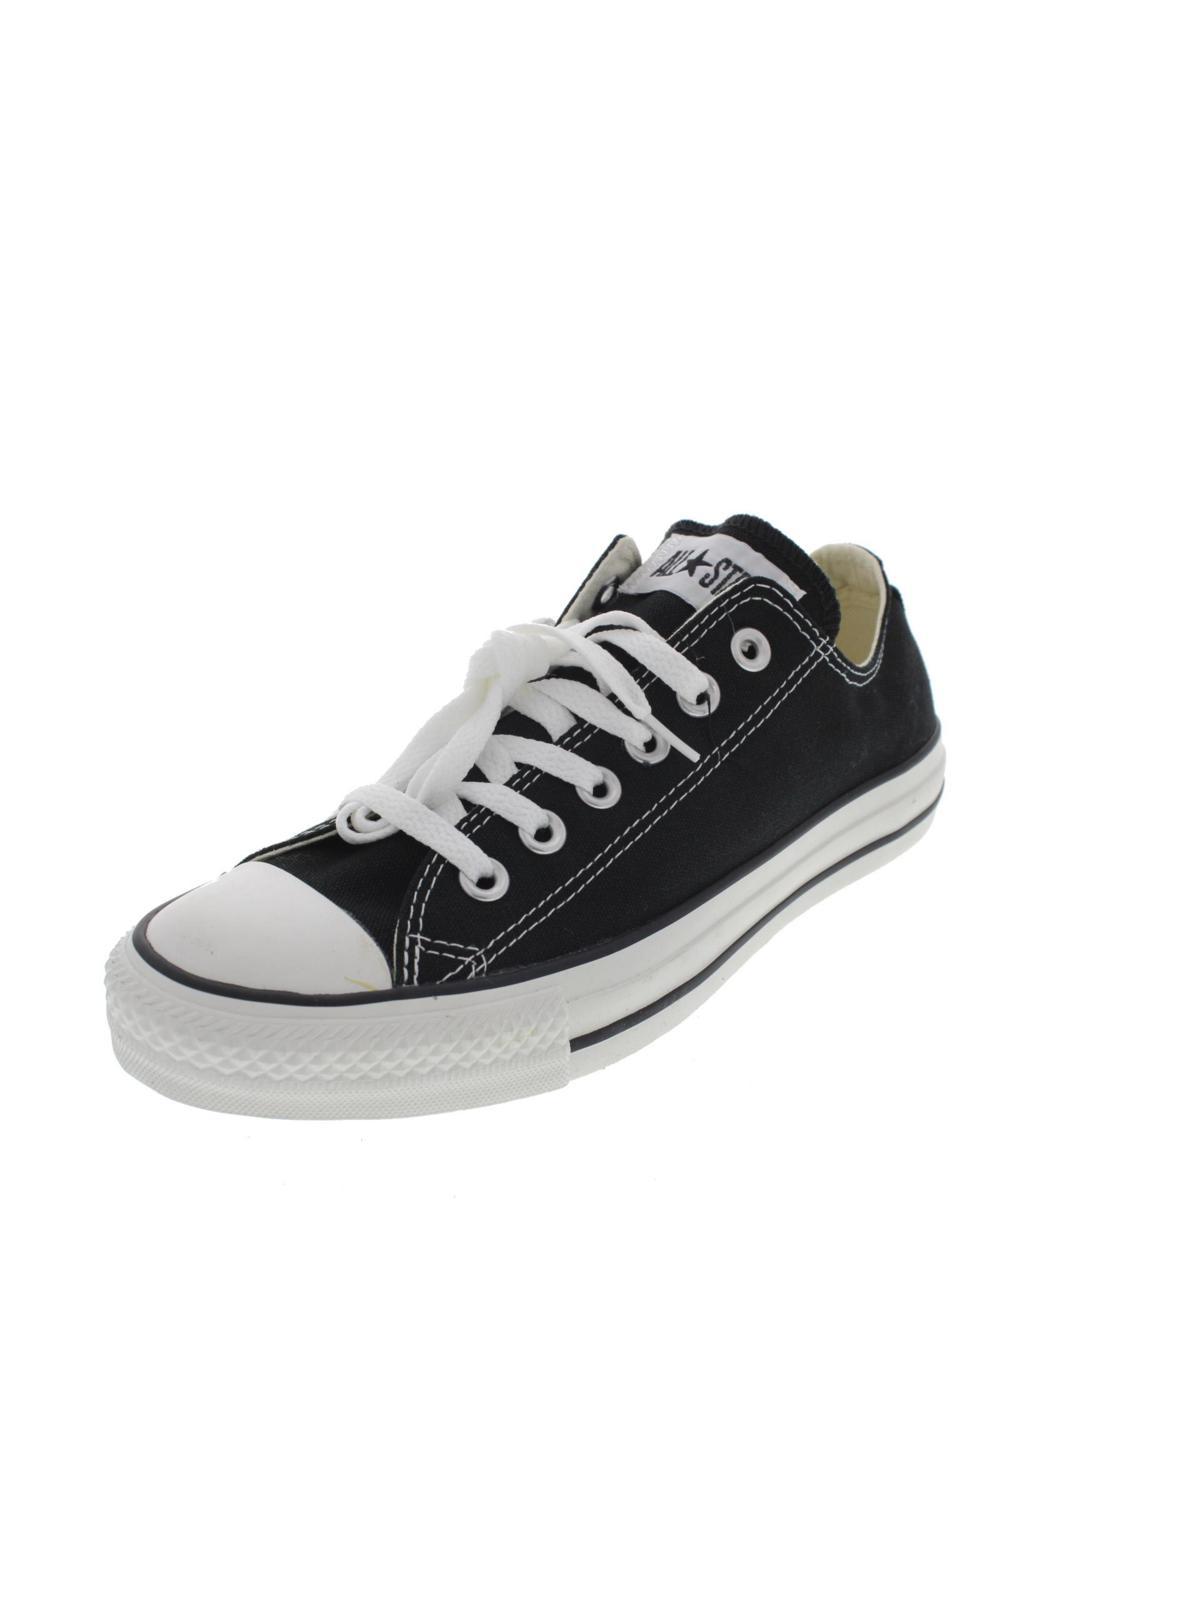 Converse All Star Ox Canvas Toe Cap Casual Shoes in Black | Lyst